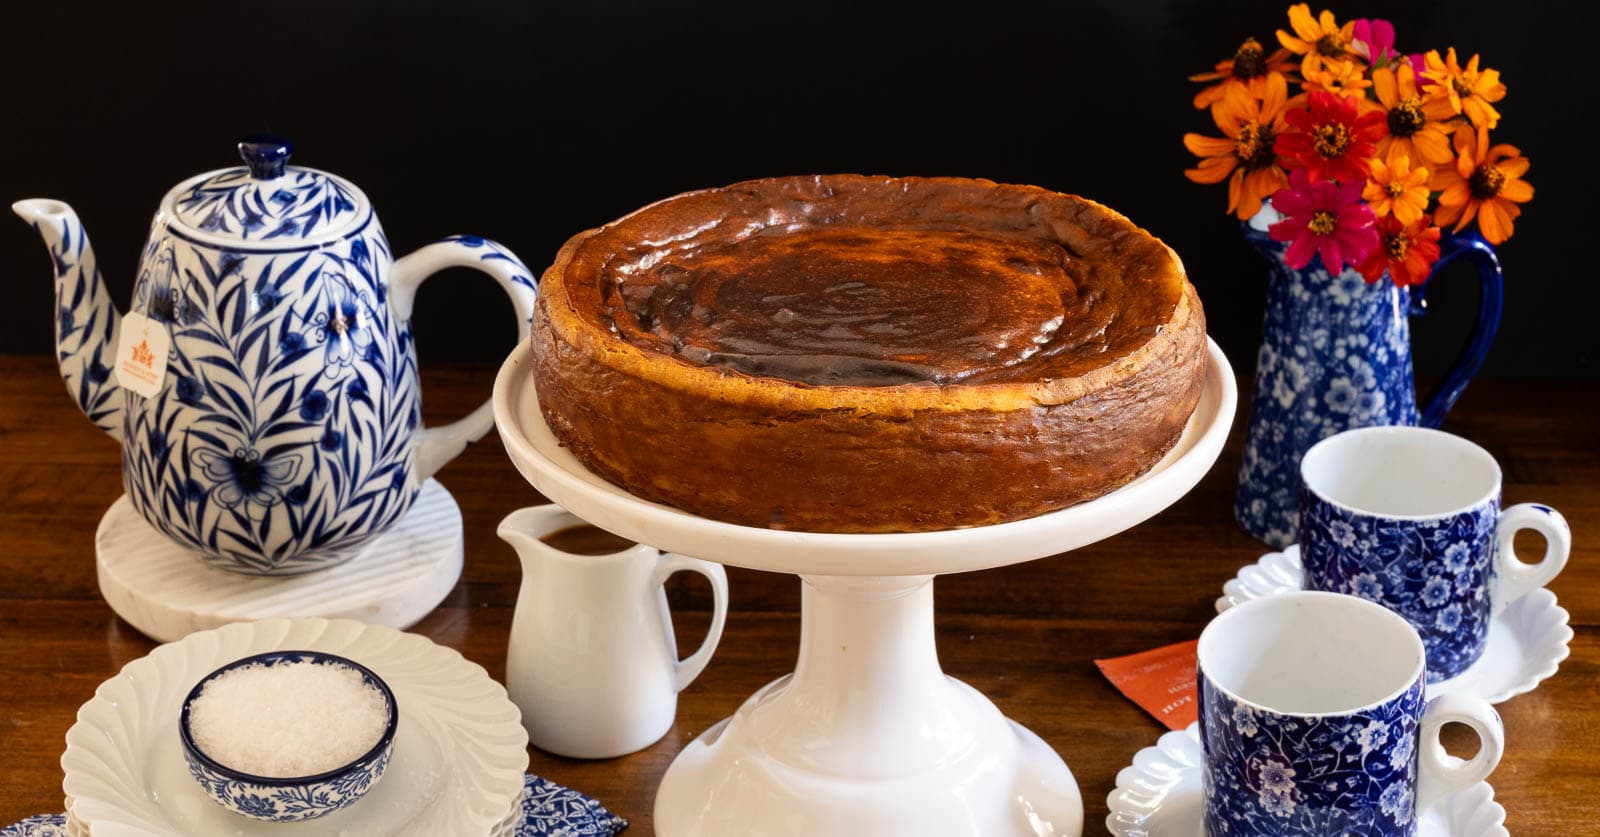 Horizontal photo of a Ridiculously Easy Basque Sweet Potato Cheesecake on a white pedestal serving plate.